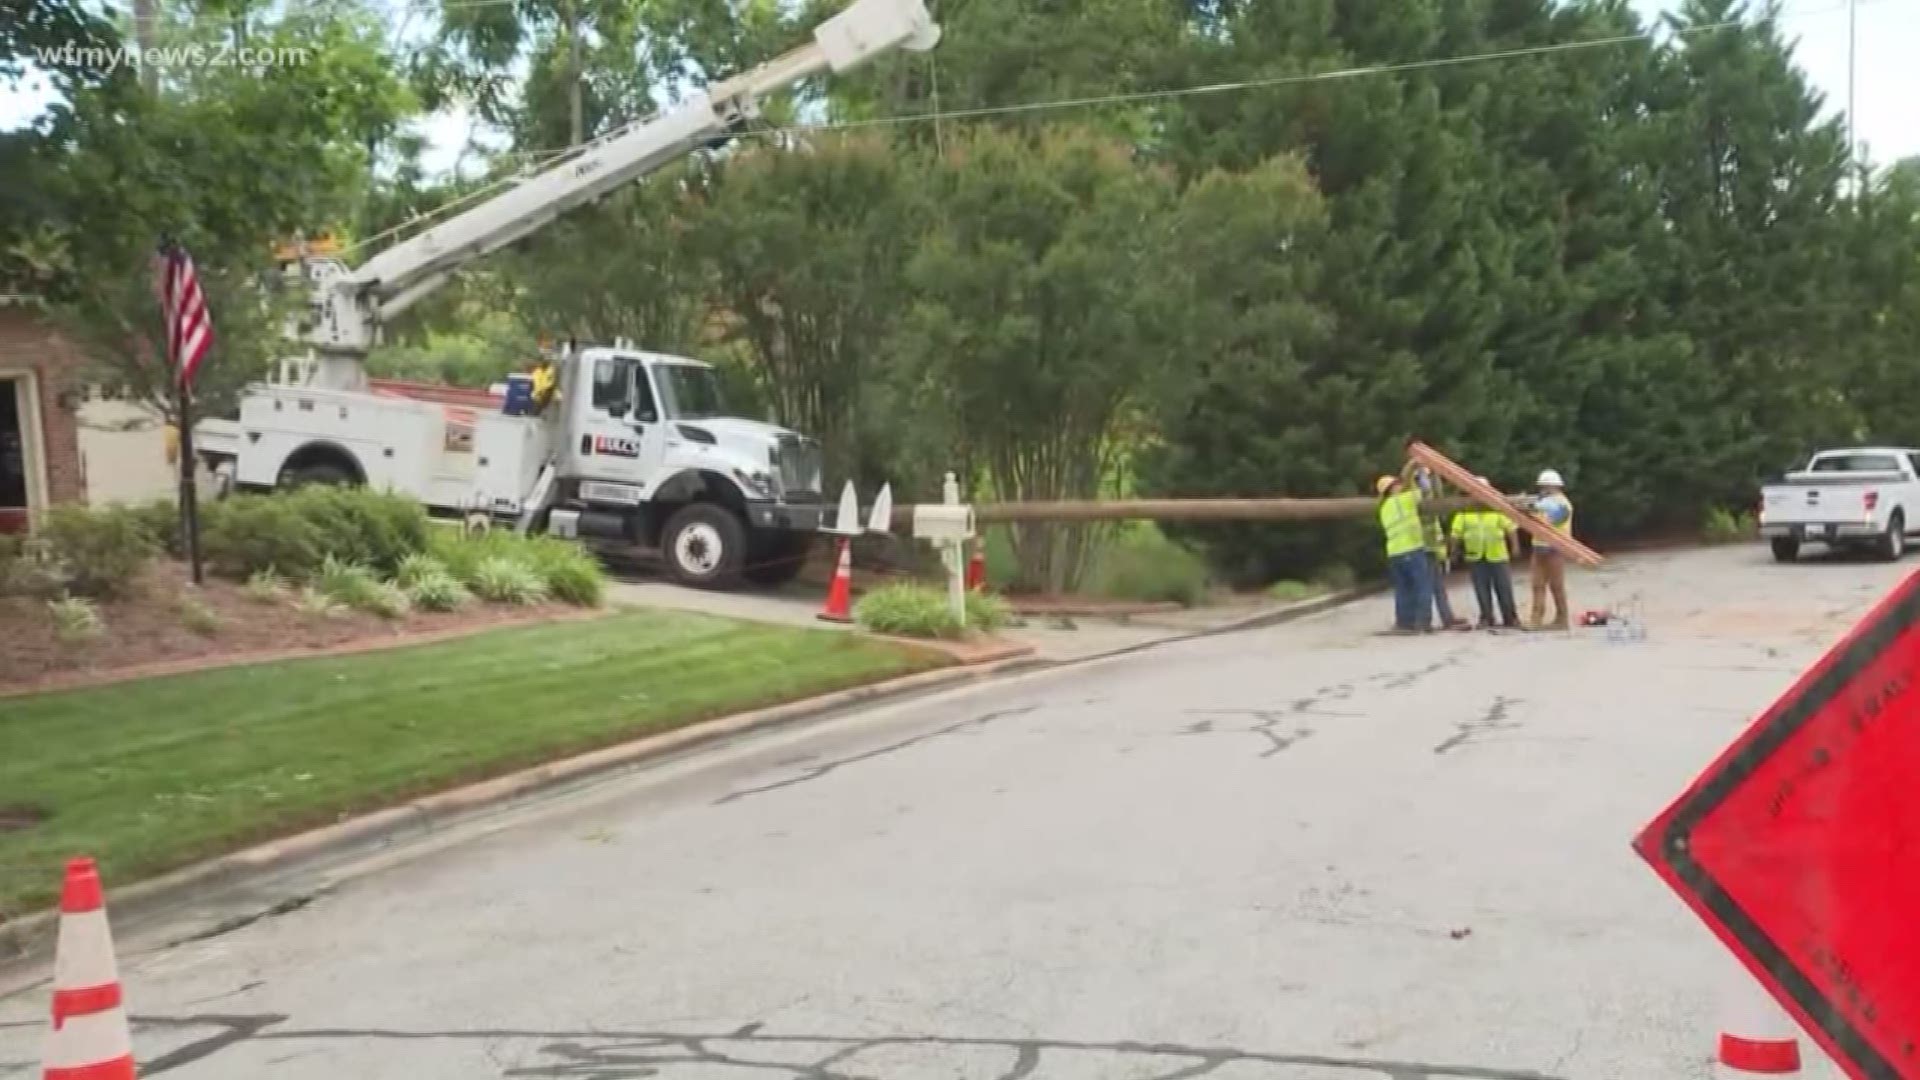 One homeowner in Greensboro is looking for another place to call home after a utility pole fell onto his house during an afternoon storm.